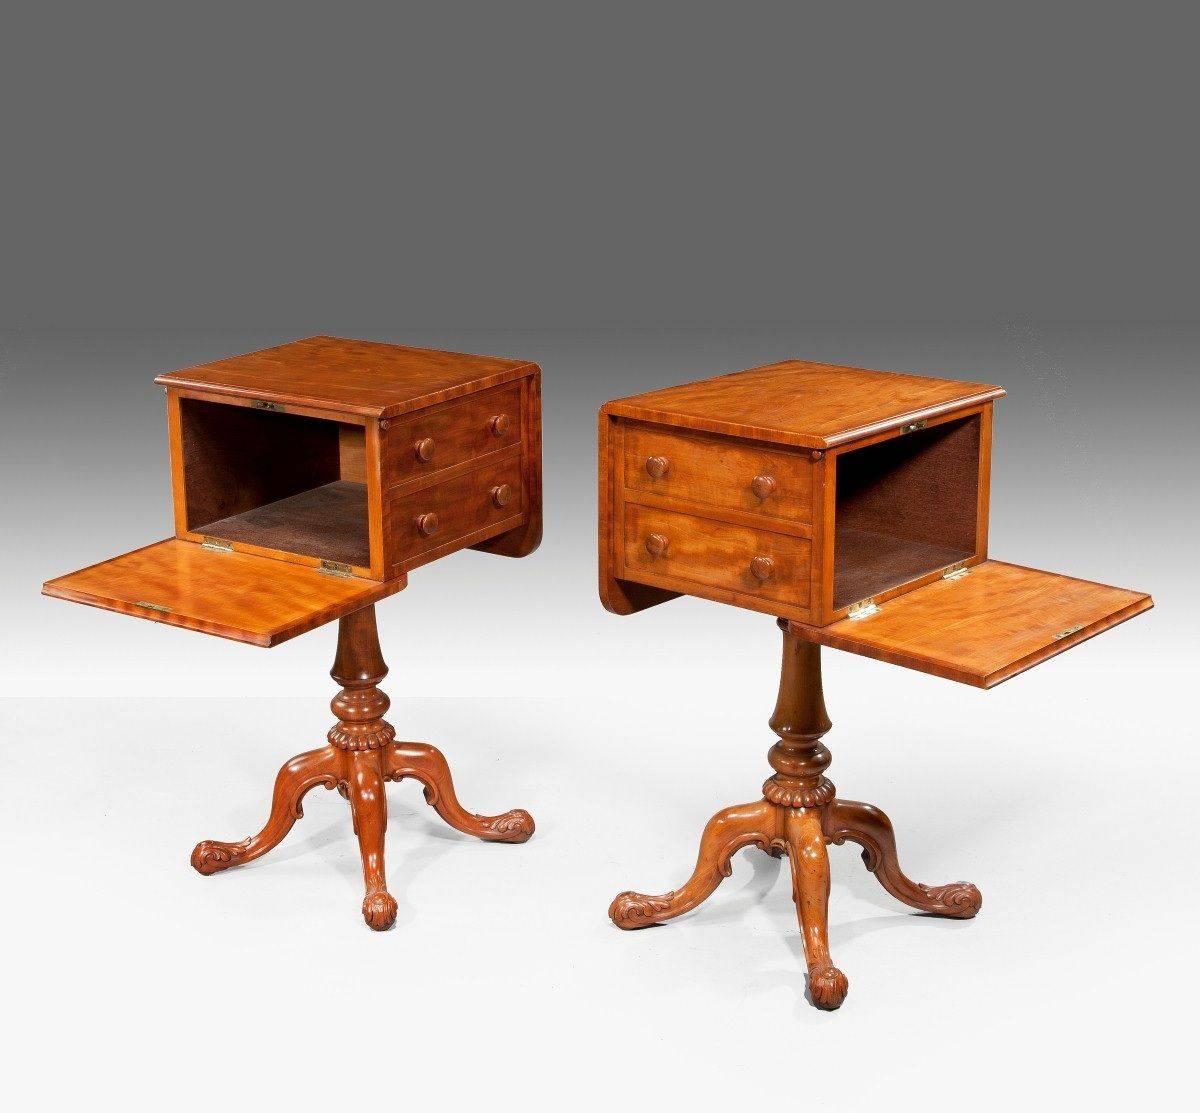 These table are without a shadow of doubt made by Gillows of Lancaster around the 1840s. Each cupboard has two flaps and two dummy draw fronts. There is a mechanism on each cupboard to the side that allows a flap to drop and reveal the interior. The